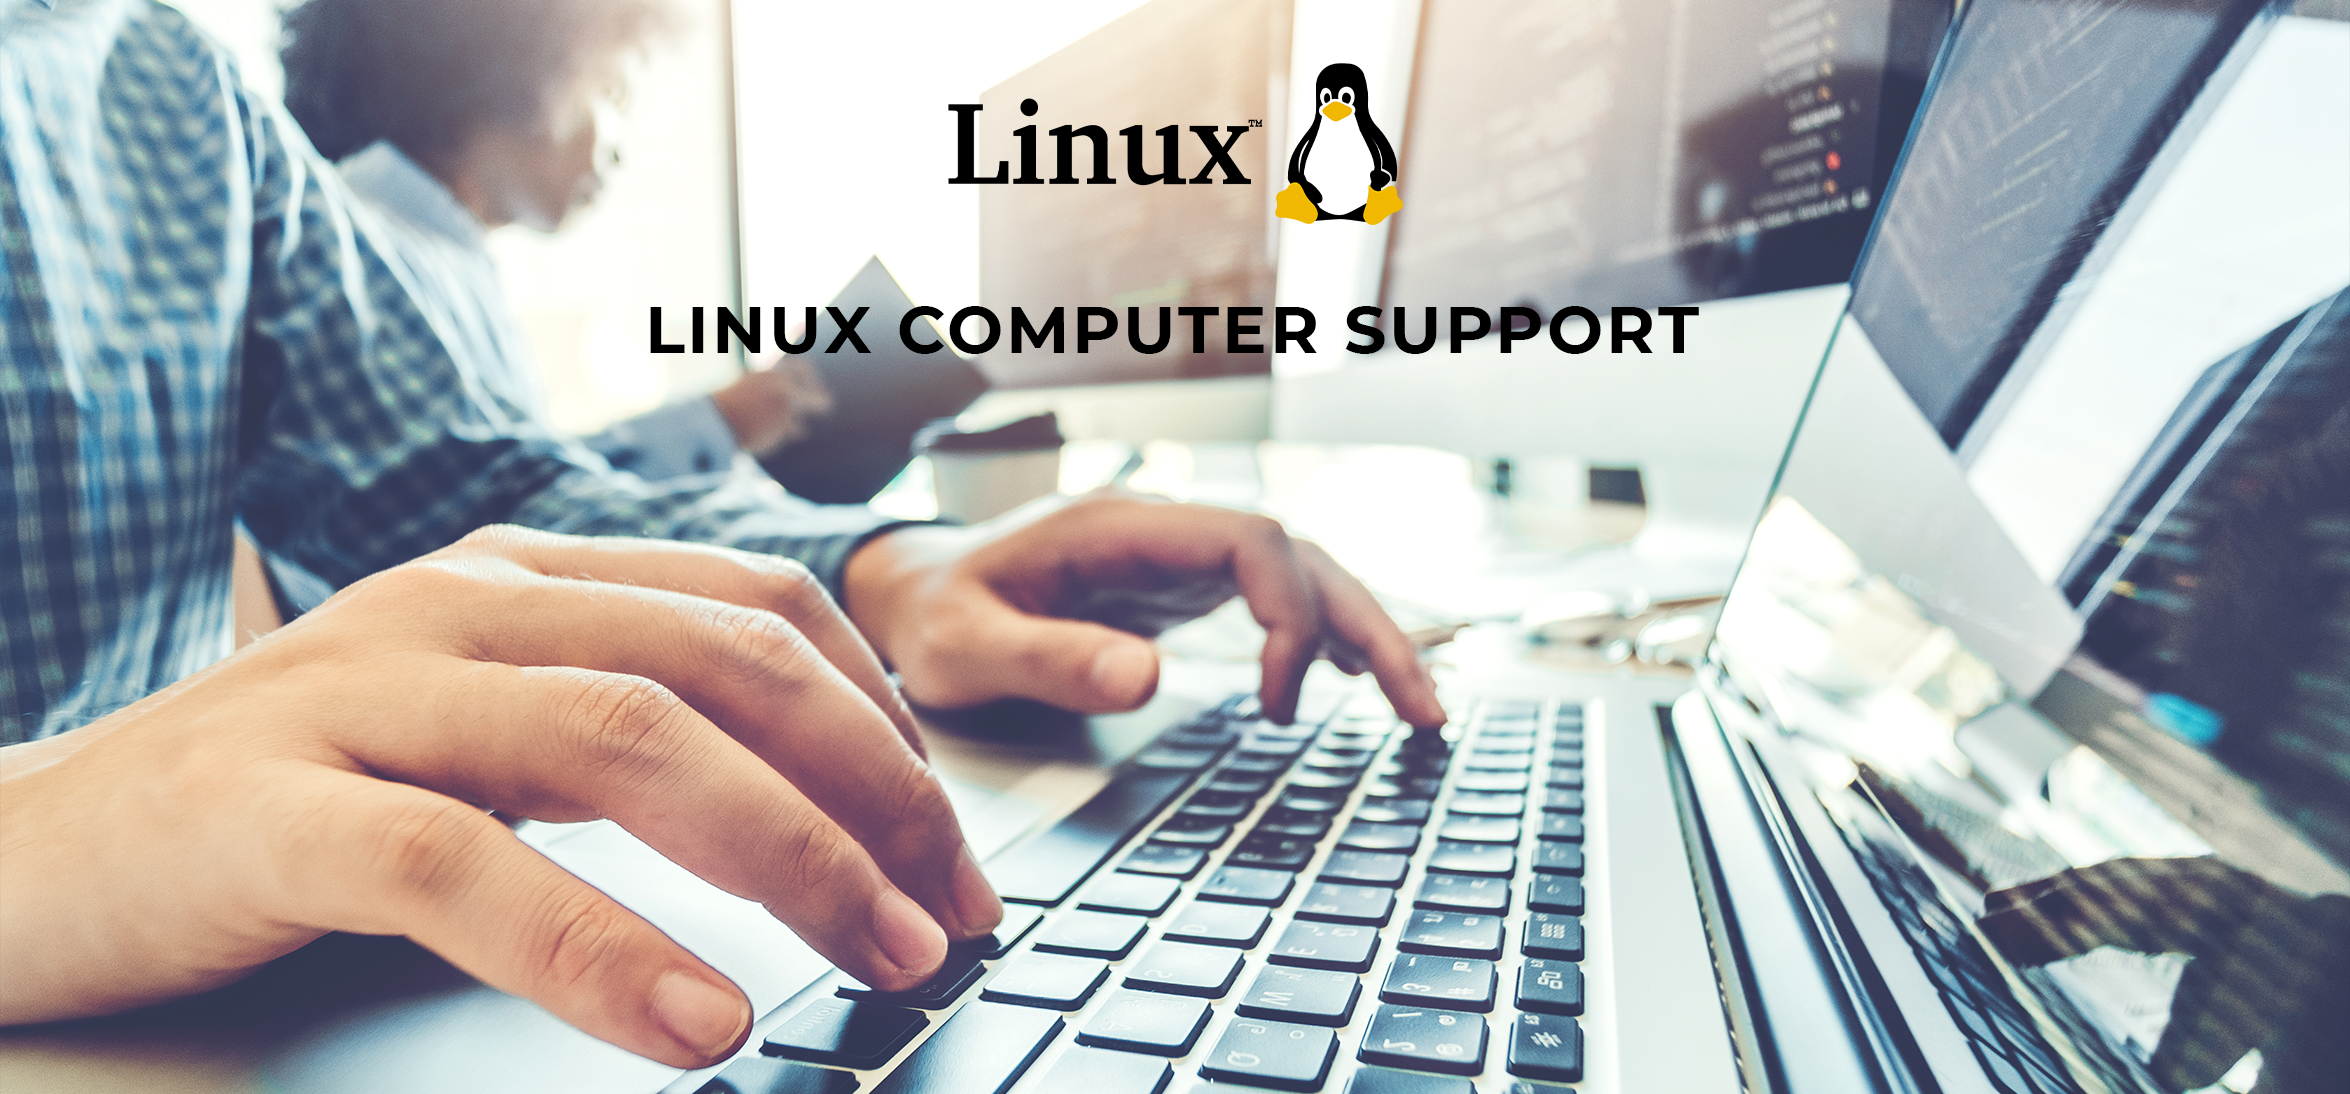 Support for Linux Servers in Alpine CA, 91901